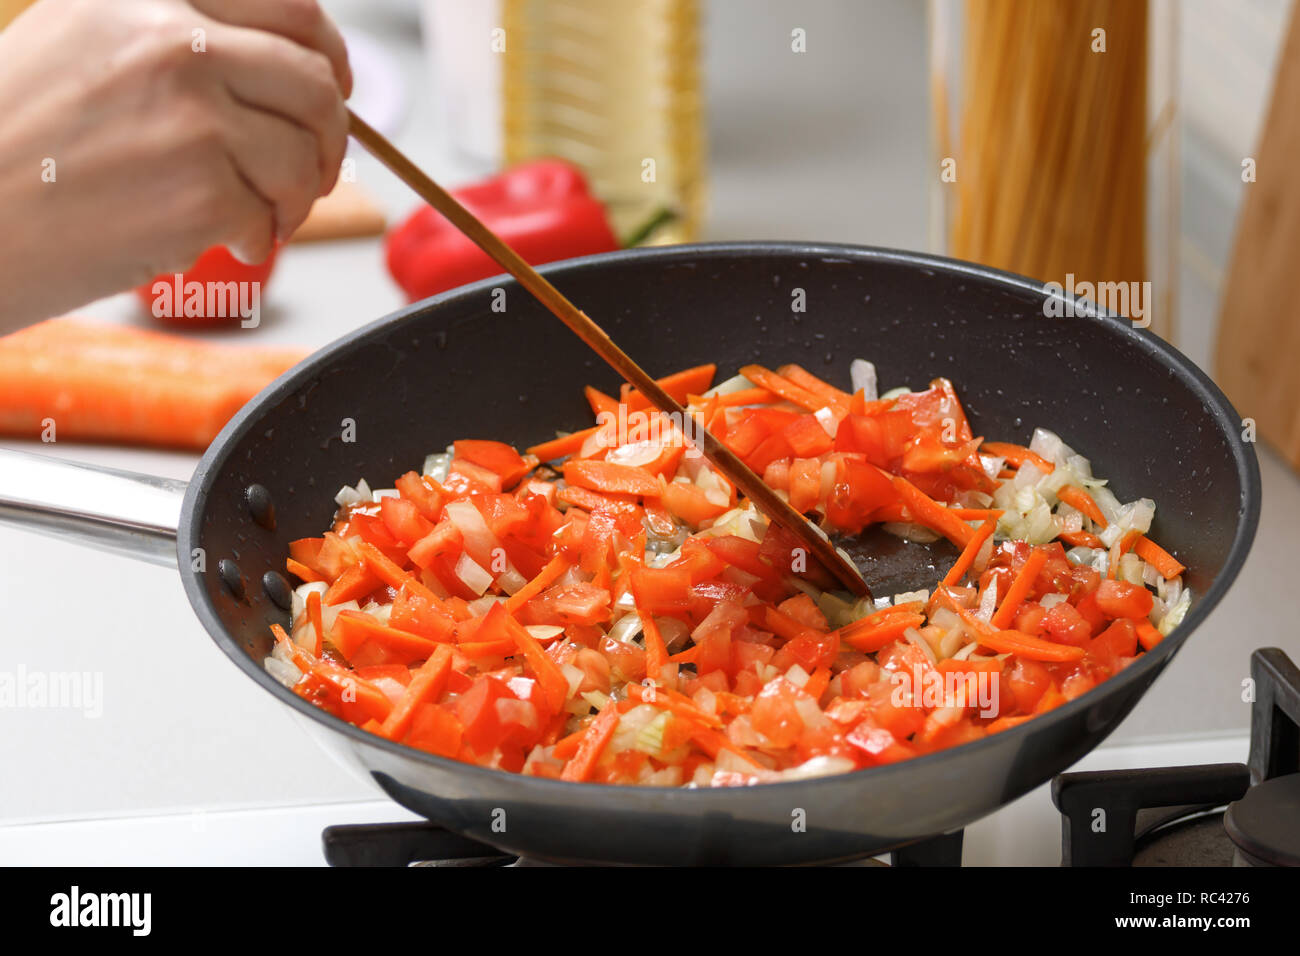 Homemade cooking. A woman fries onions, carrots and tomatoes in a hot pan with vegetable oil. Close-up. Stock Photo